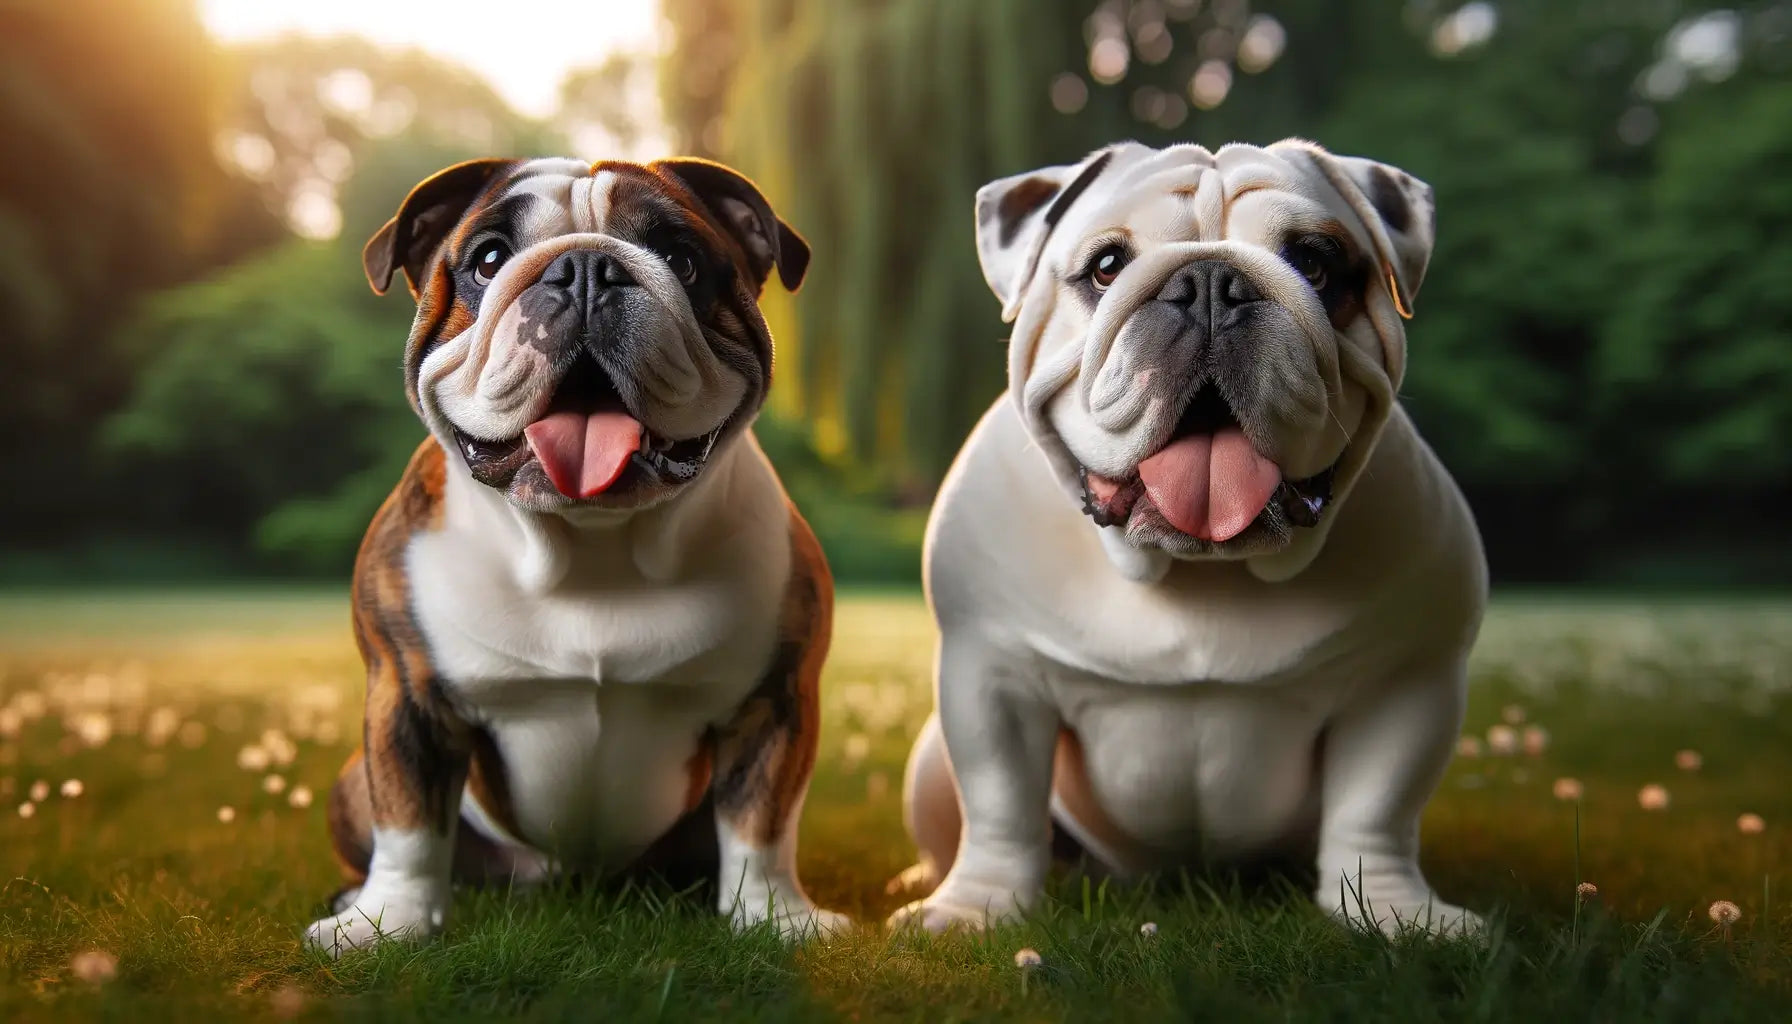 Image showing two bulldogs, an Olde English Bulldogge and an English Bulldog, sitting on the grass and panting towards the camera.